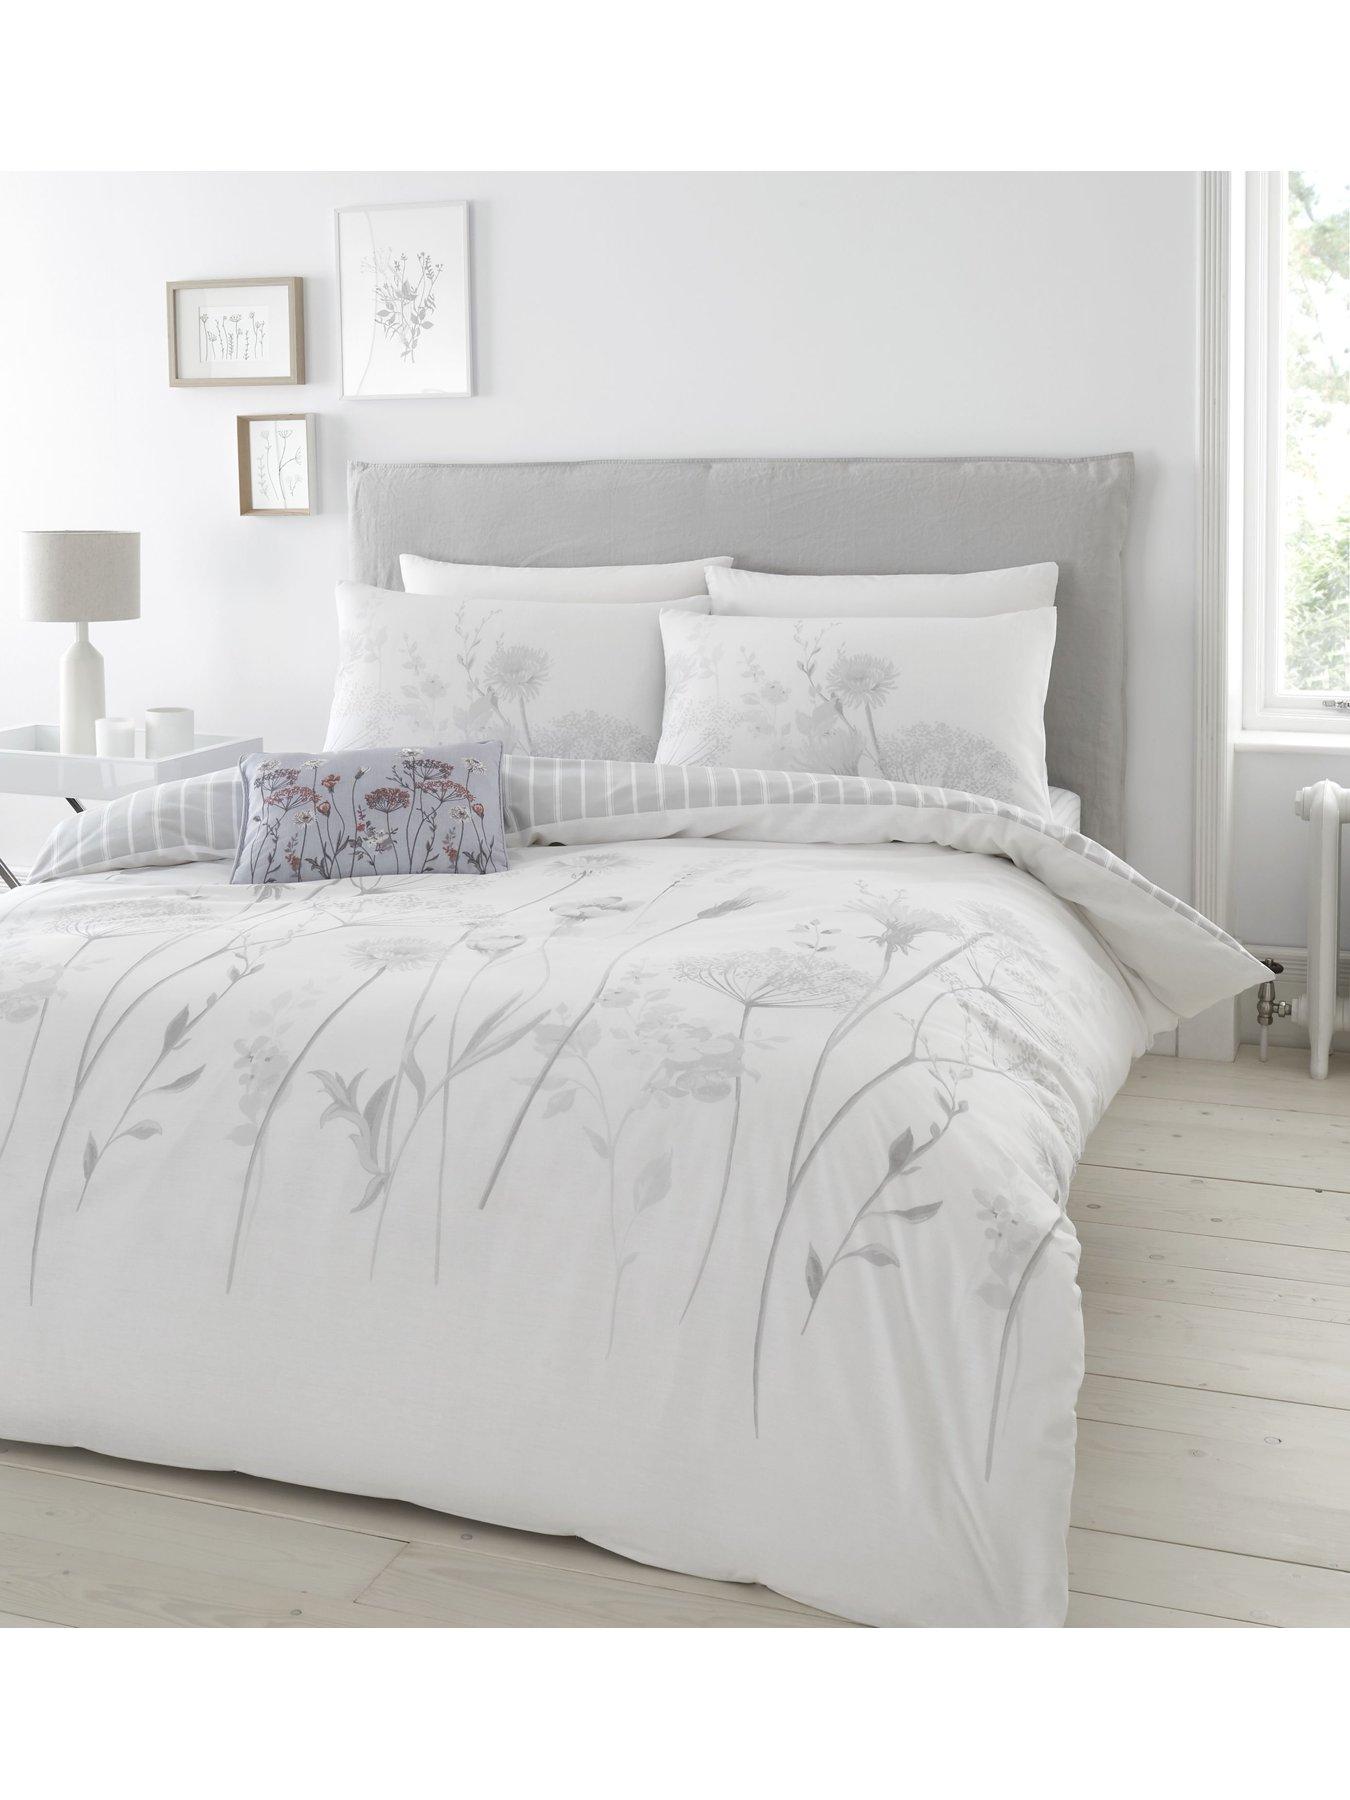 Catherine Lansfield Meadowsweet Floral Duvet Cover Set - White | very.co.uk